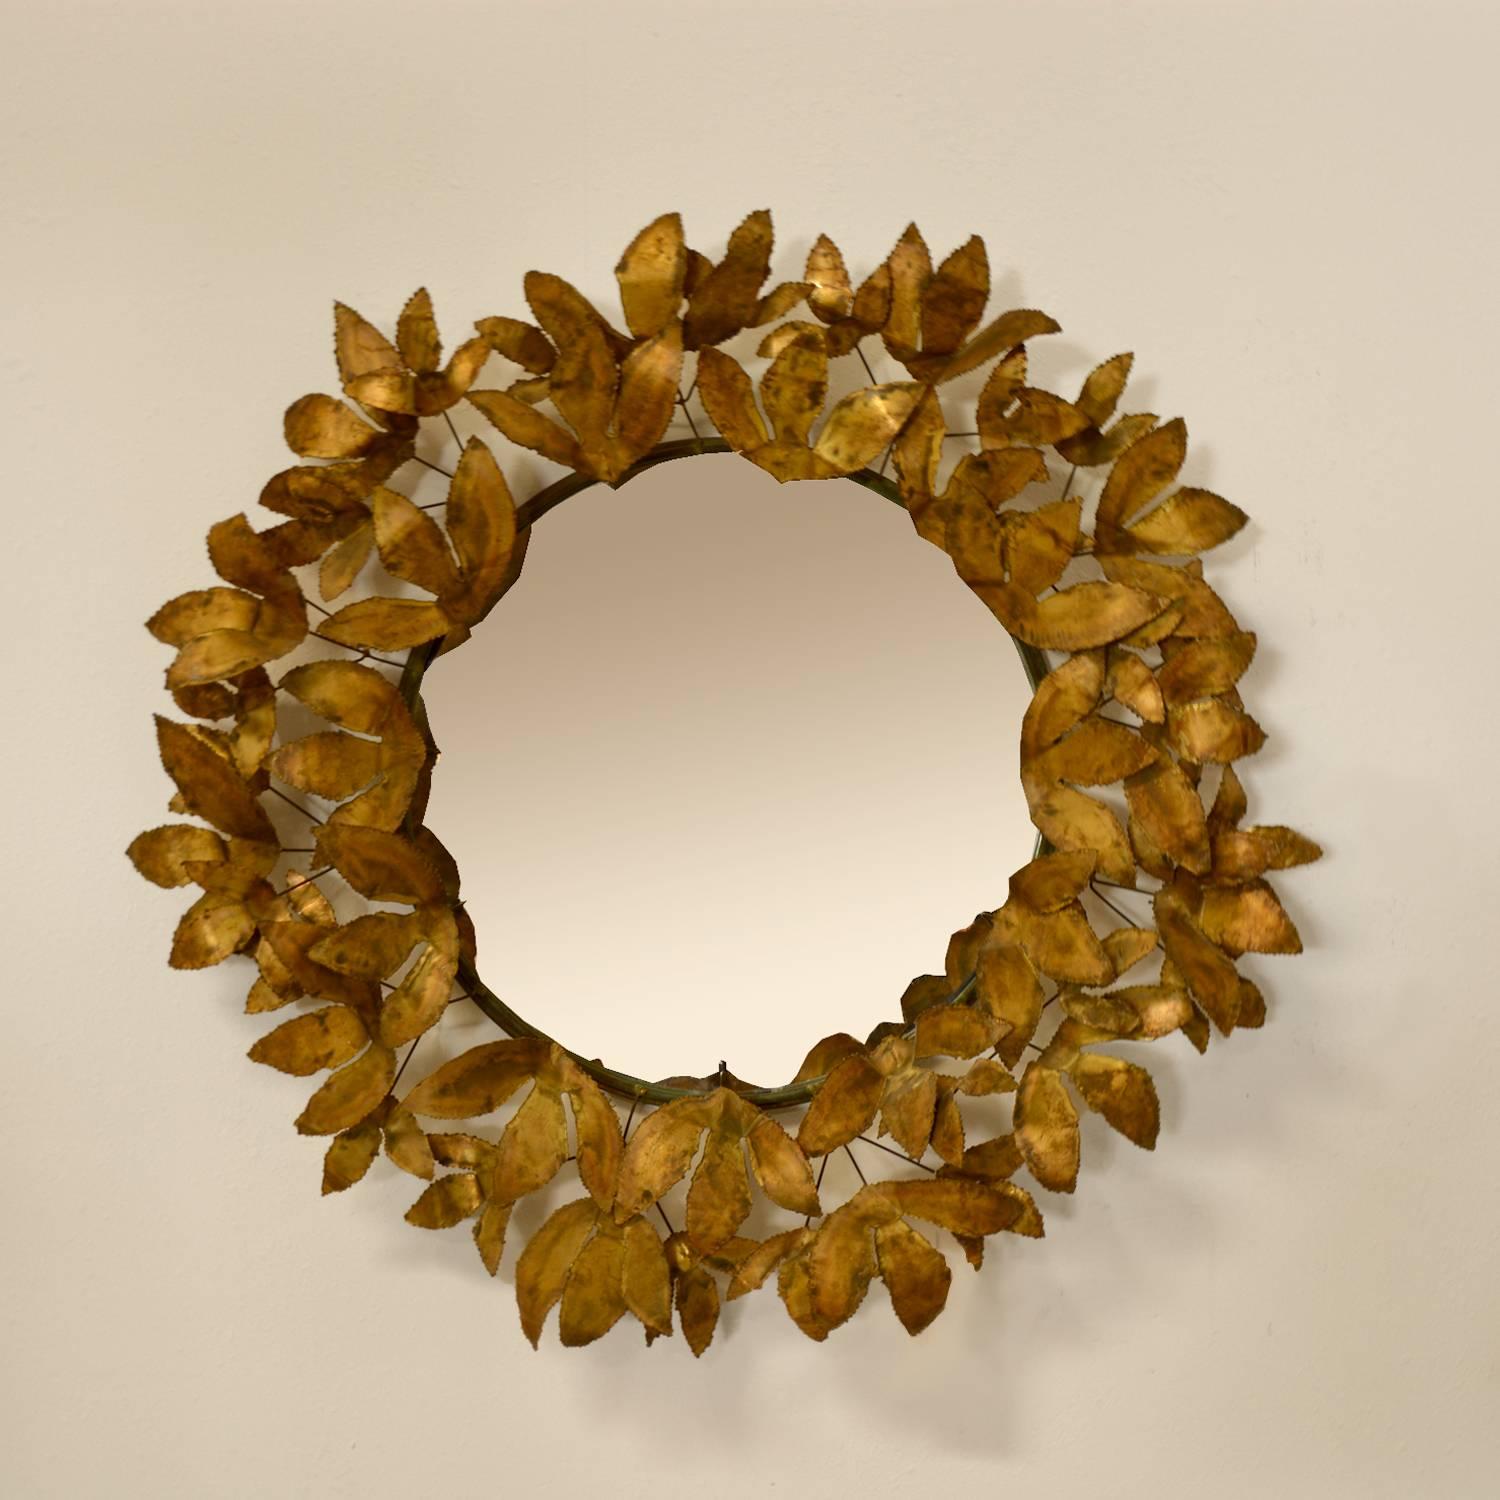 Stunning Curtis Jere leaf mirror. Rare form, with torch cut patinated brass ‘leaves’ in place of the typical raindrops. American Circa 1970’s